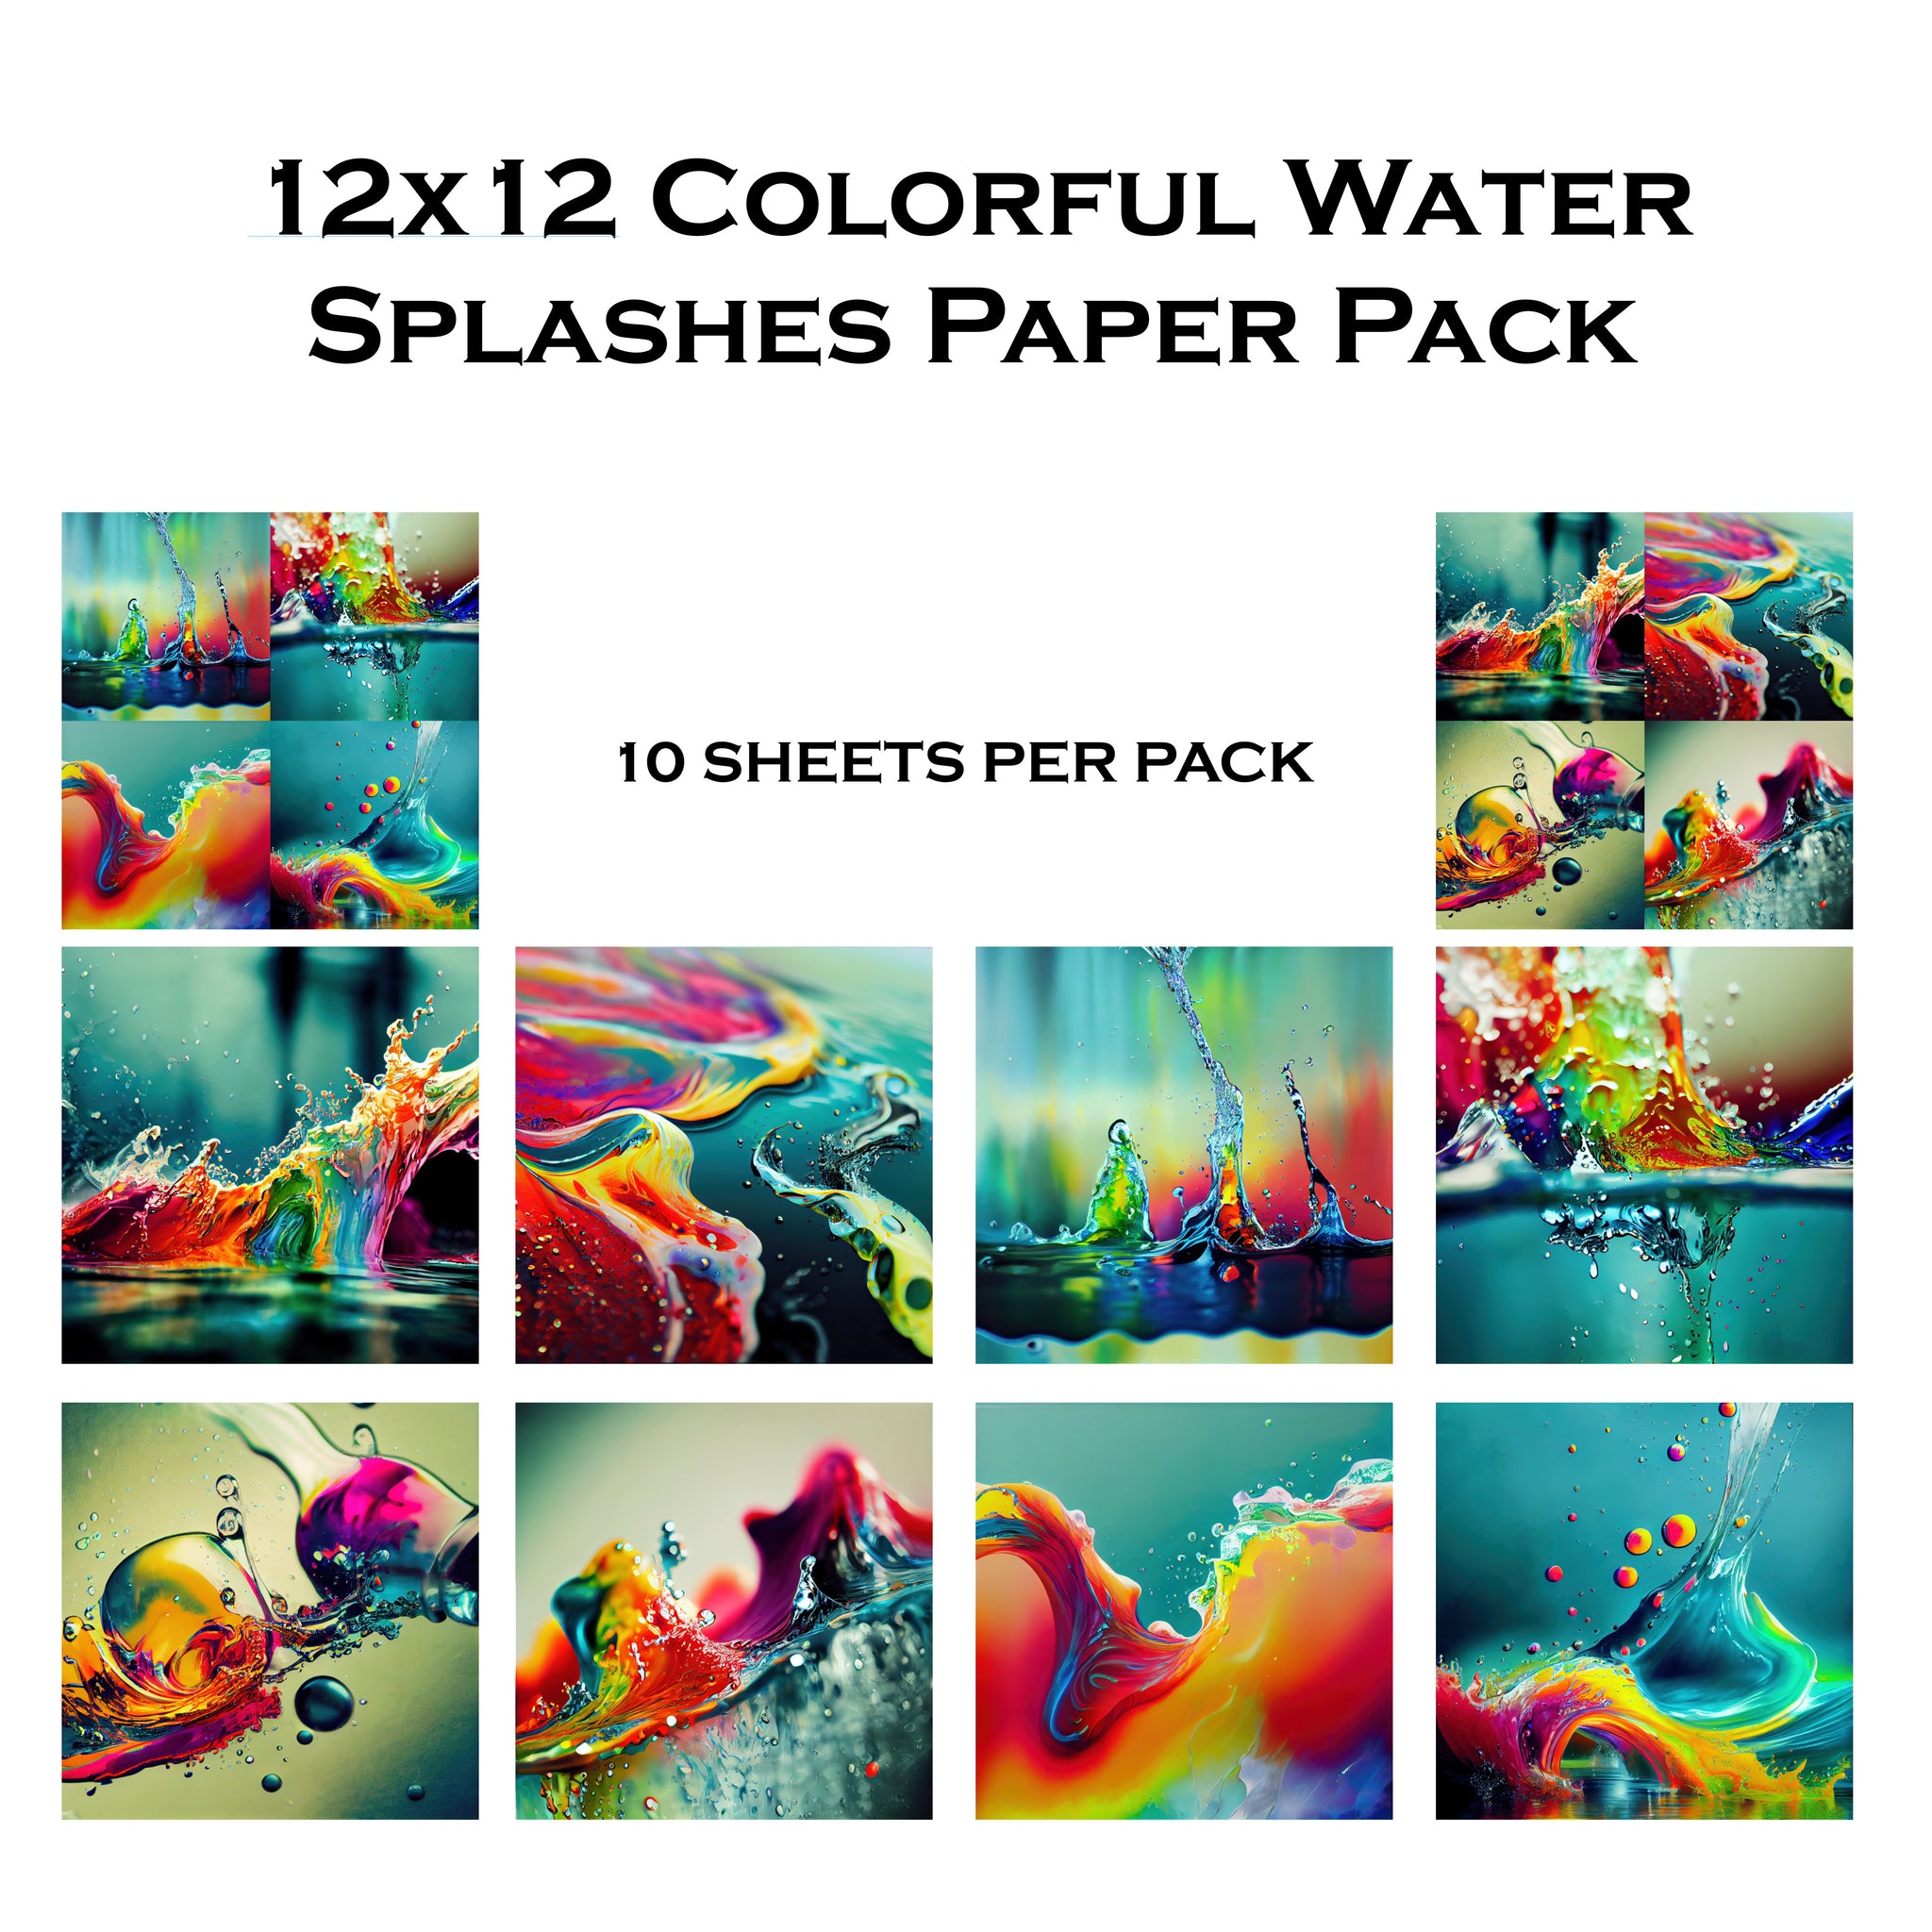 Colorful Water Splashes 12x12 Paper Pack